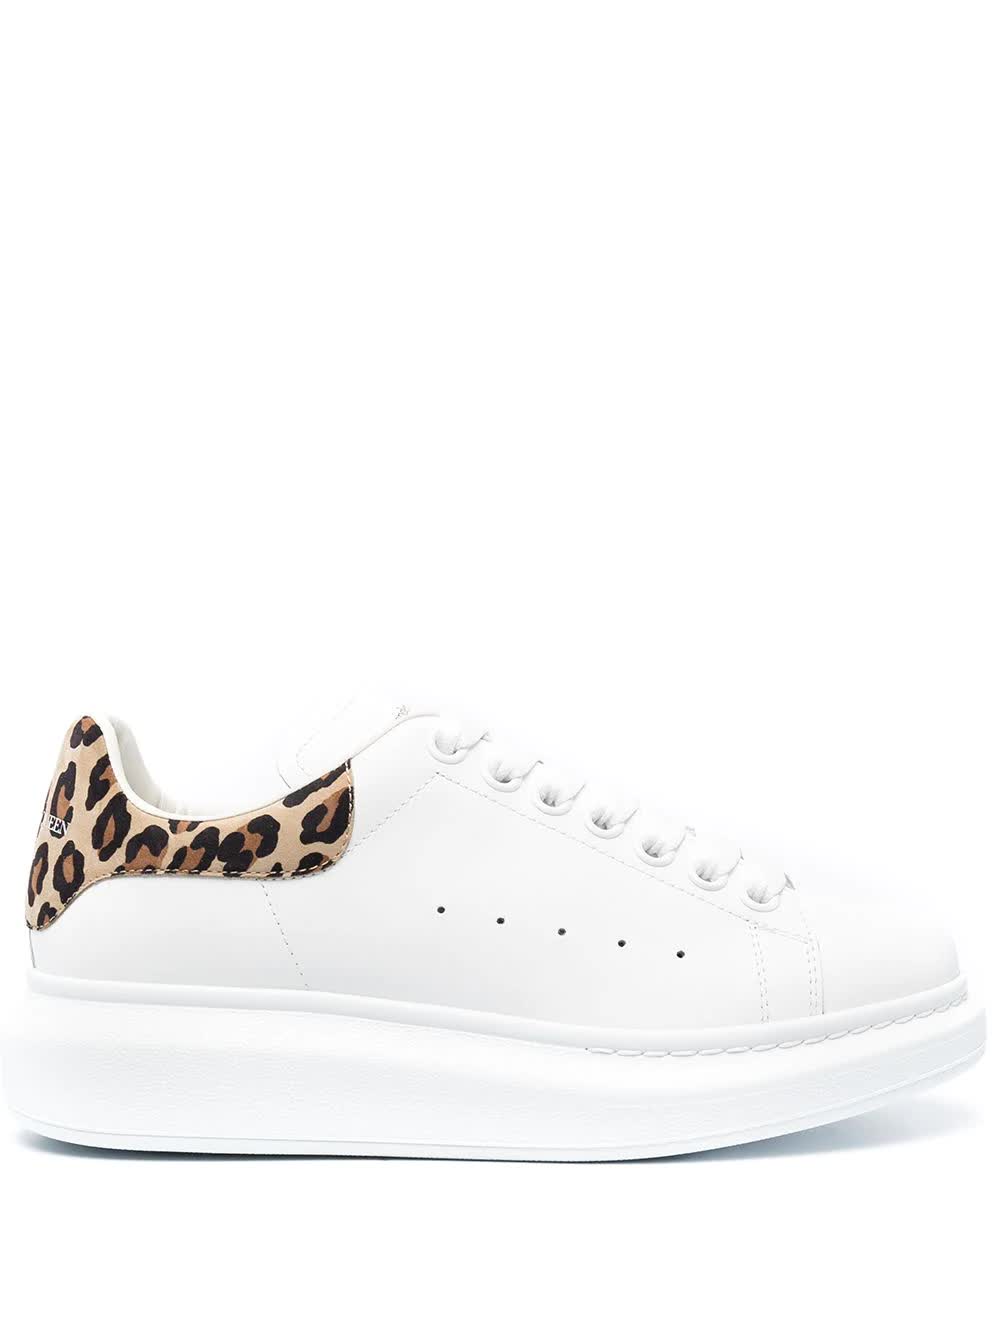 Buy Alexander McQueen Woman White Oversize Sneakers With Leopard Spoiler online, shop Alexander McQueen shoes with free shipping